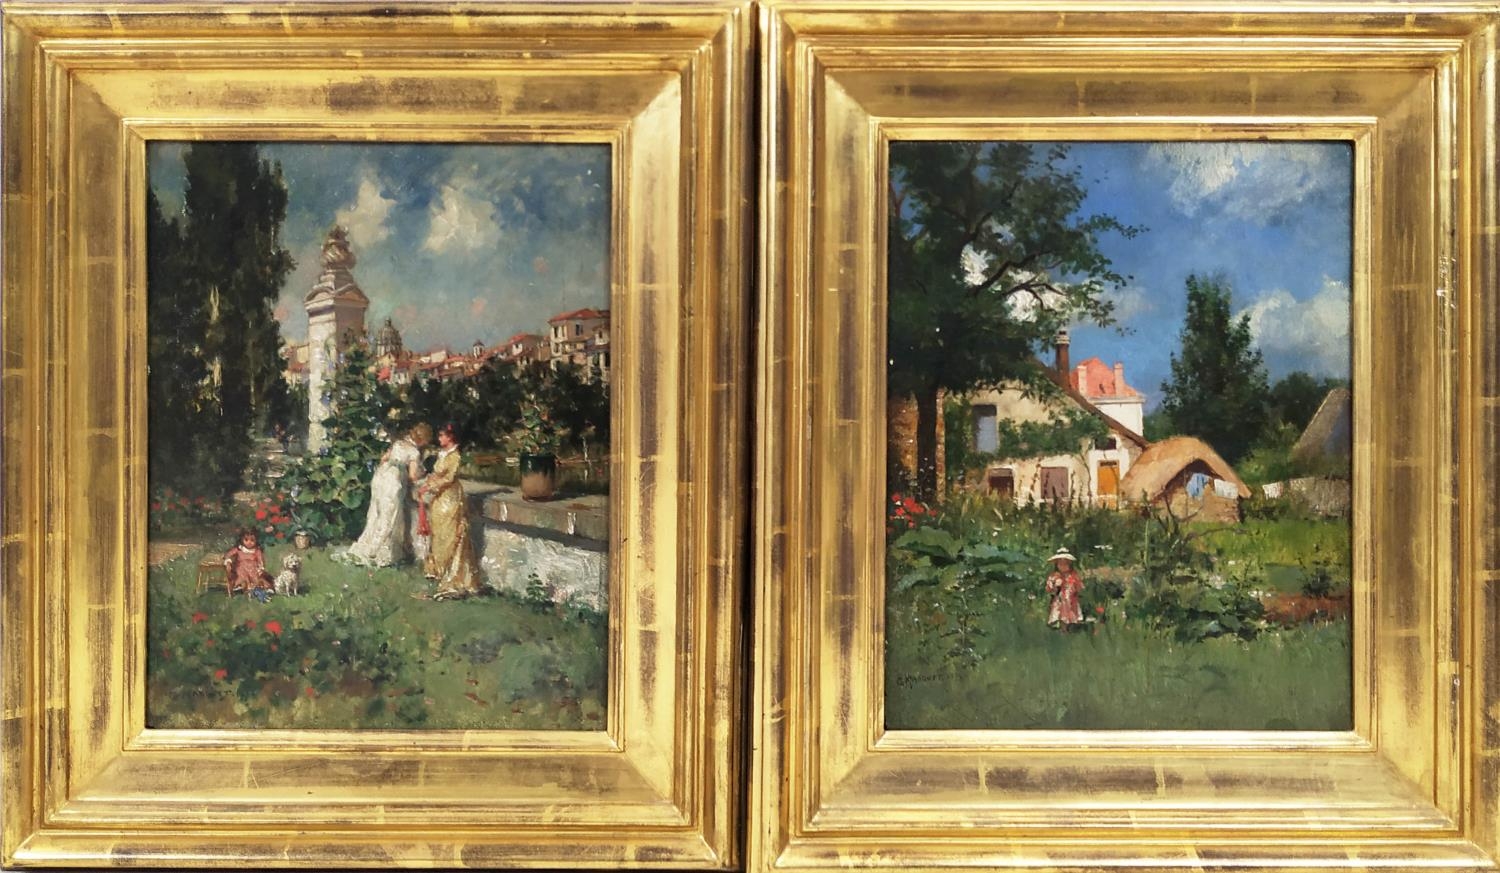 MARQUET, 'Garden Scenes with Figures', oil on board, 26cms x 21cms, a pair, signed and dated '1874',